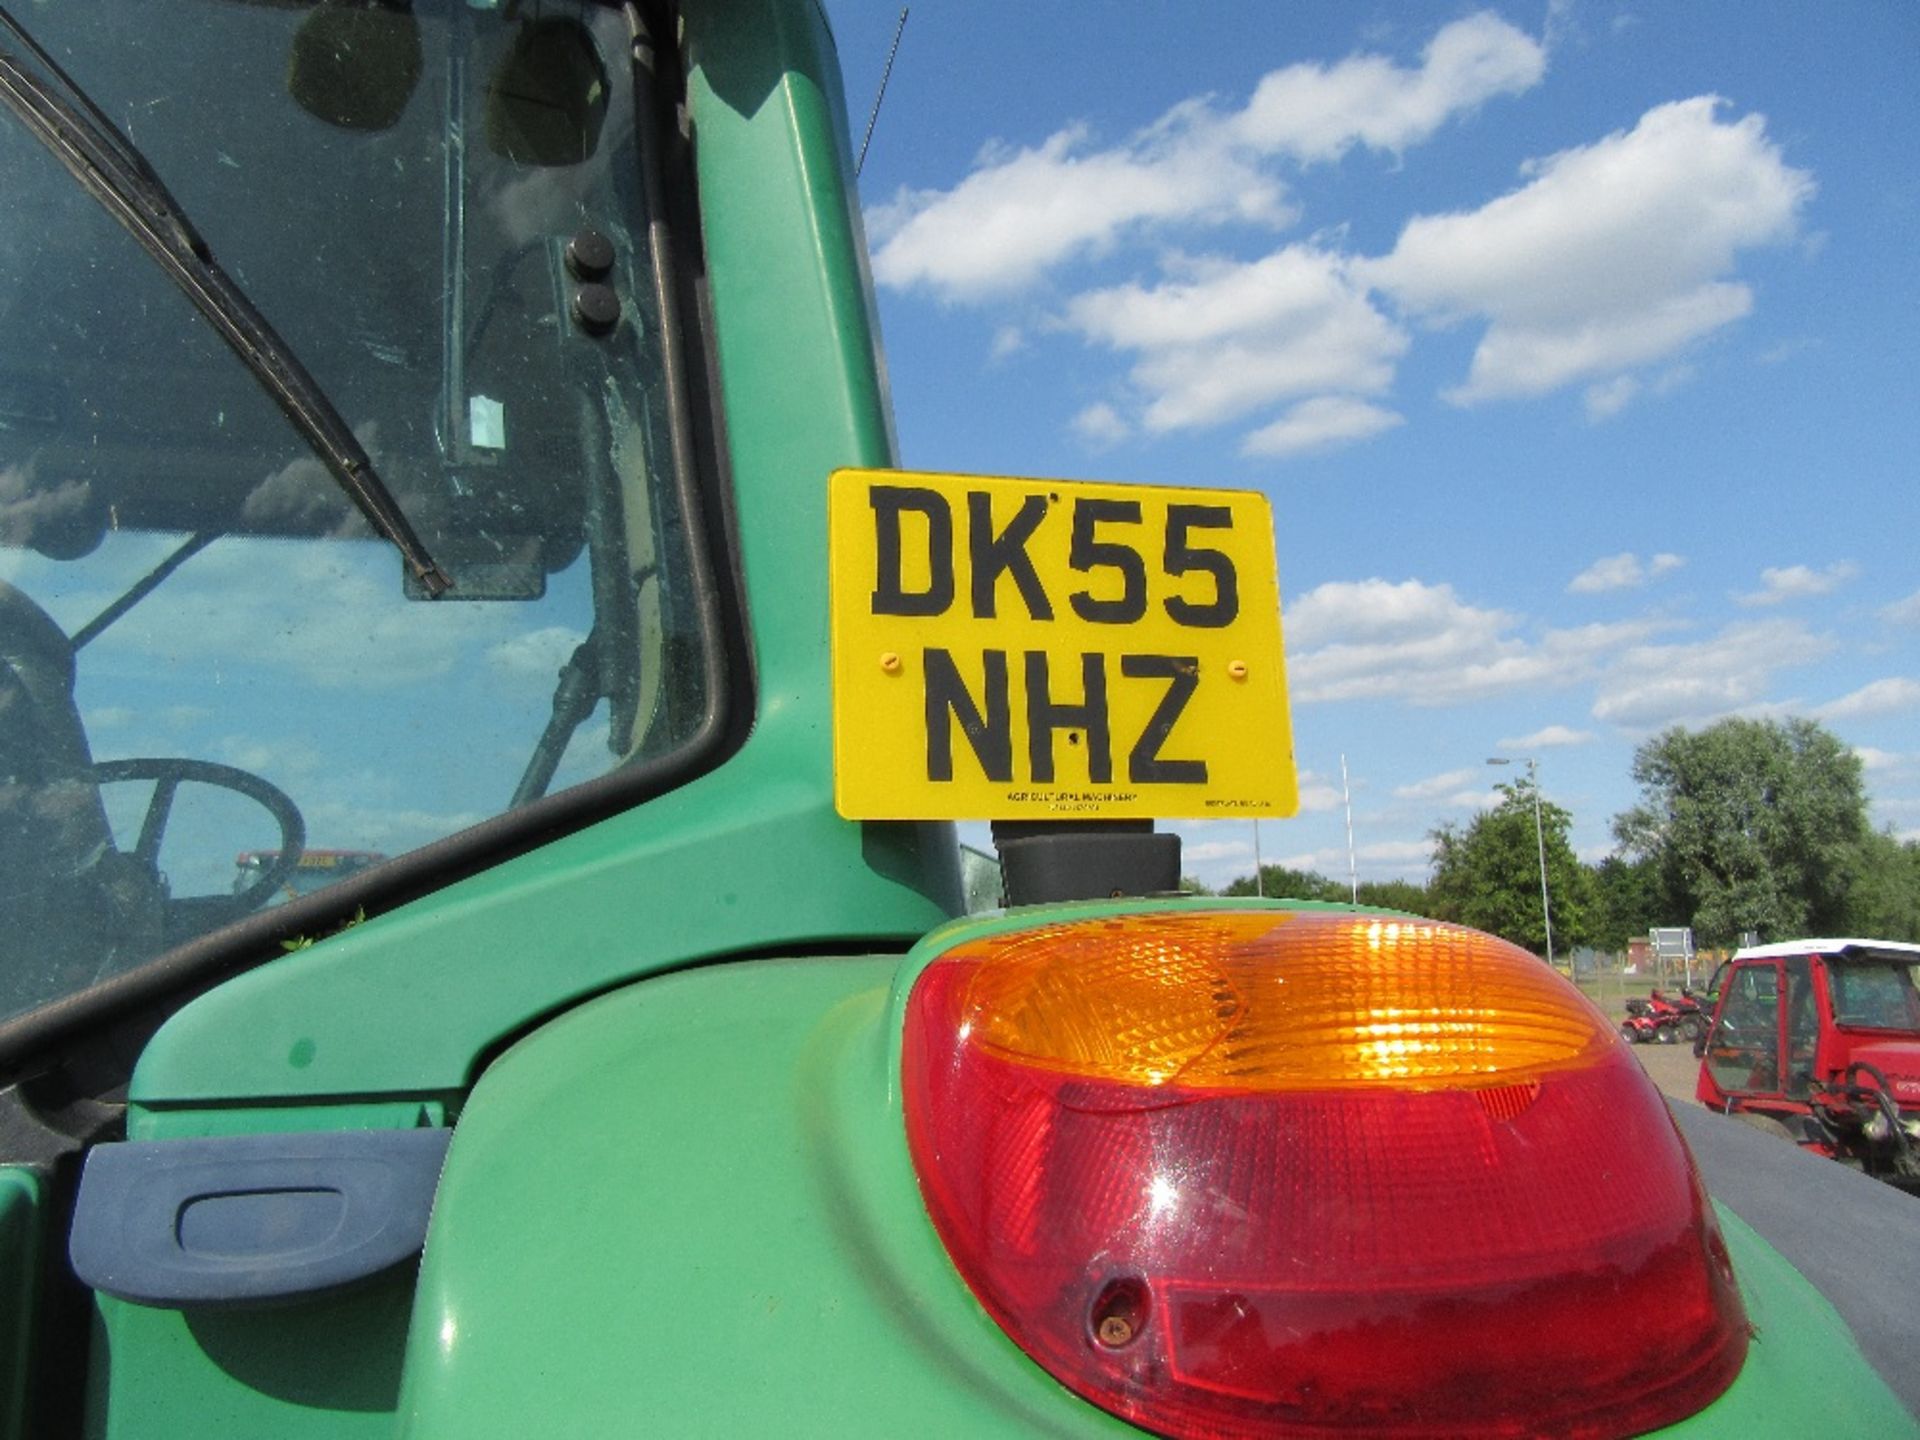 John Deere 6920 4wd Tractor with TLS Front Suspension, Cab Suspension & Air Brakes Reg No DK55 NHZ - Image 8 of 14